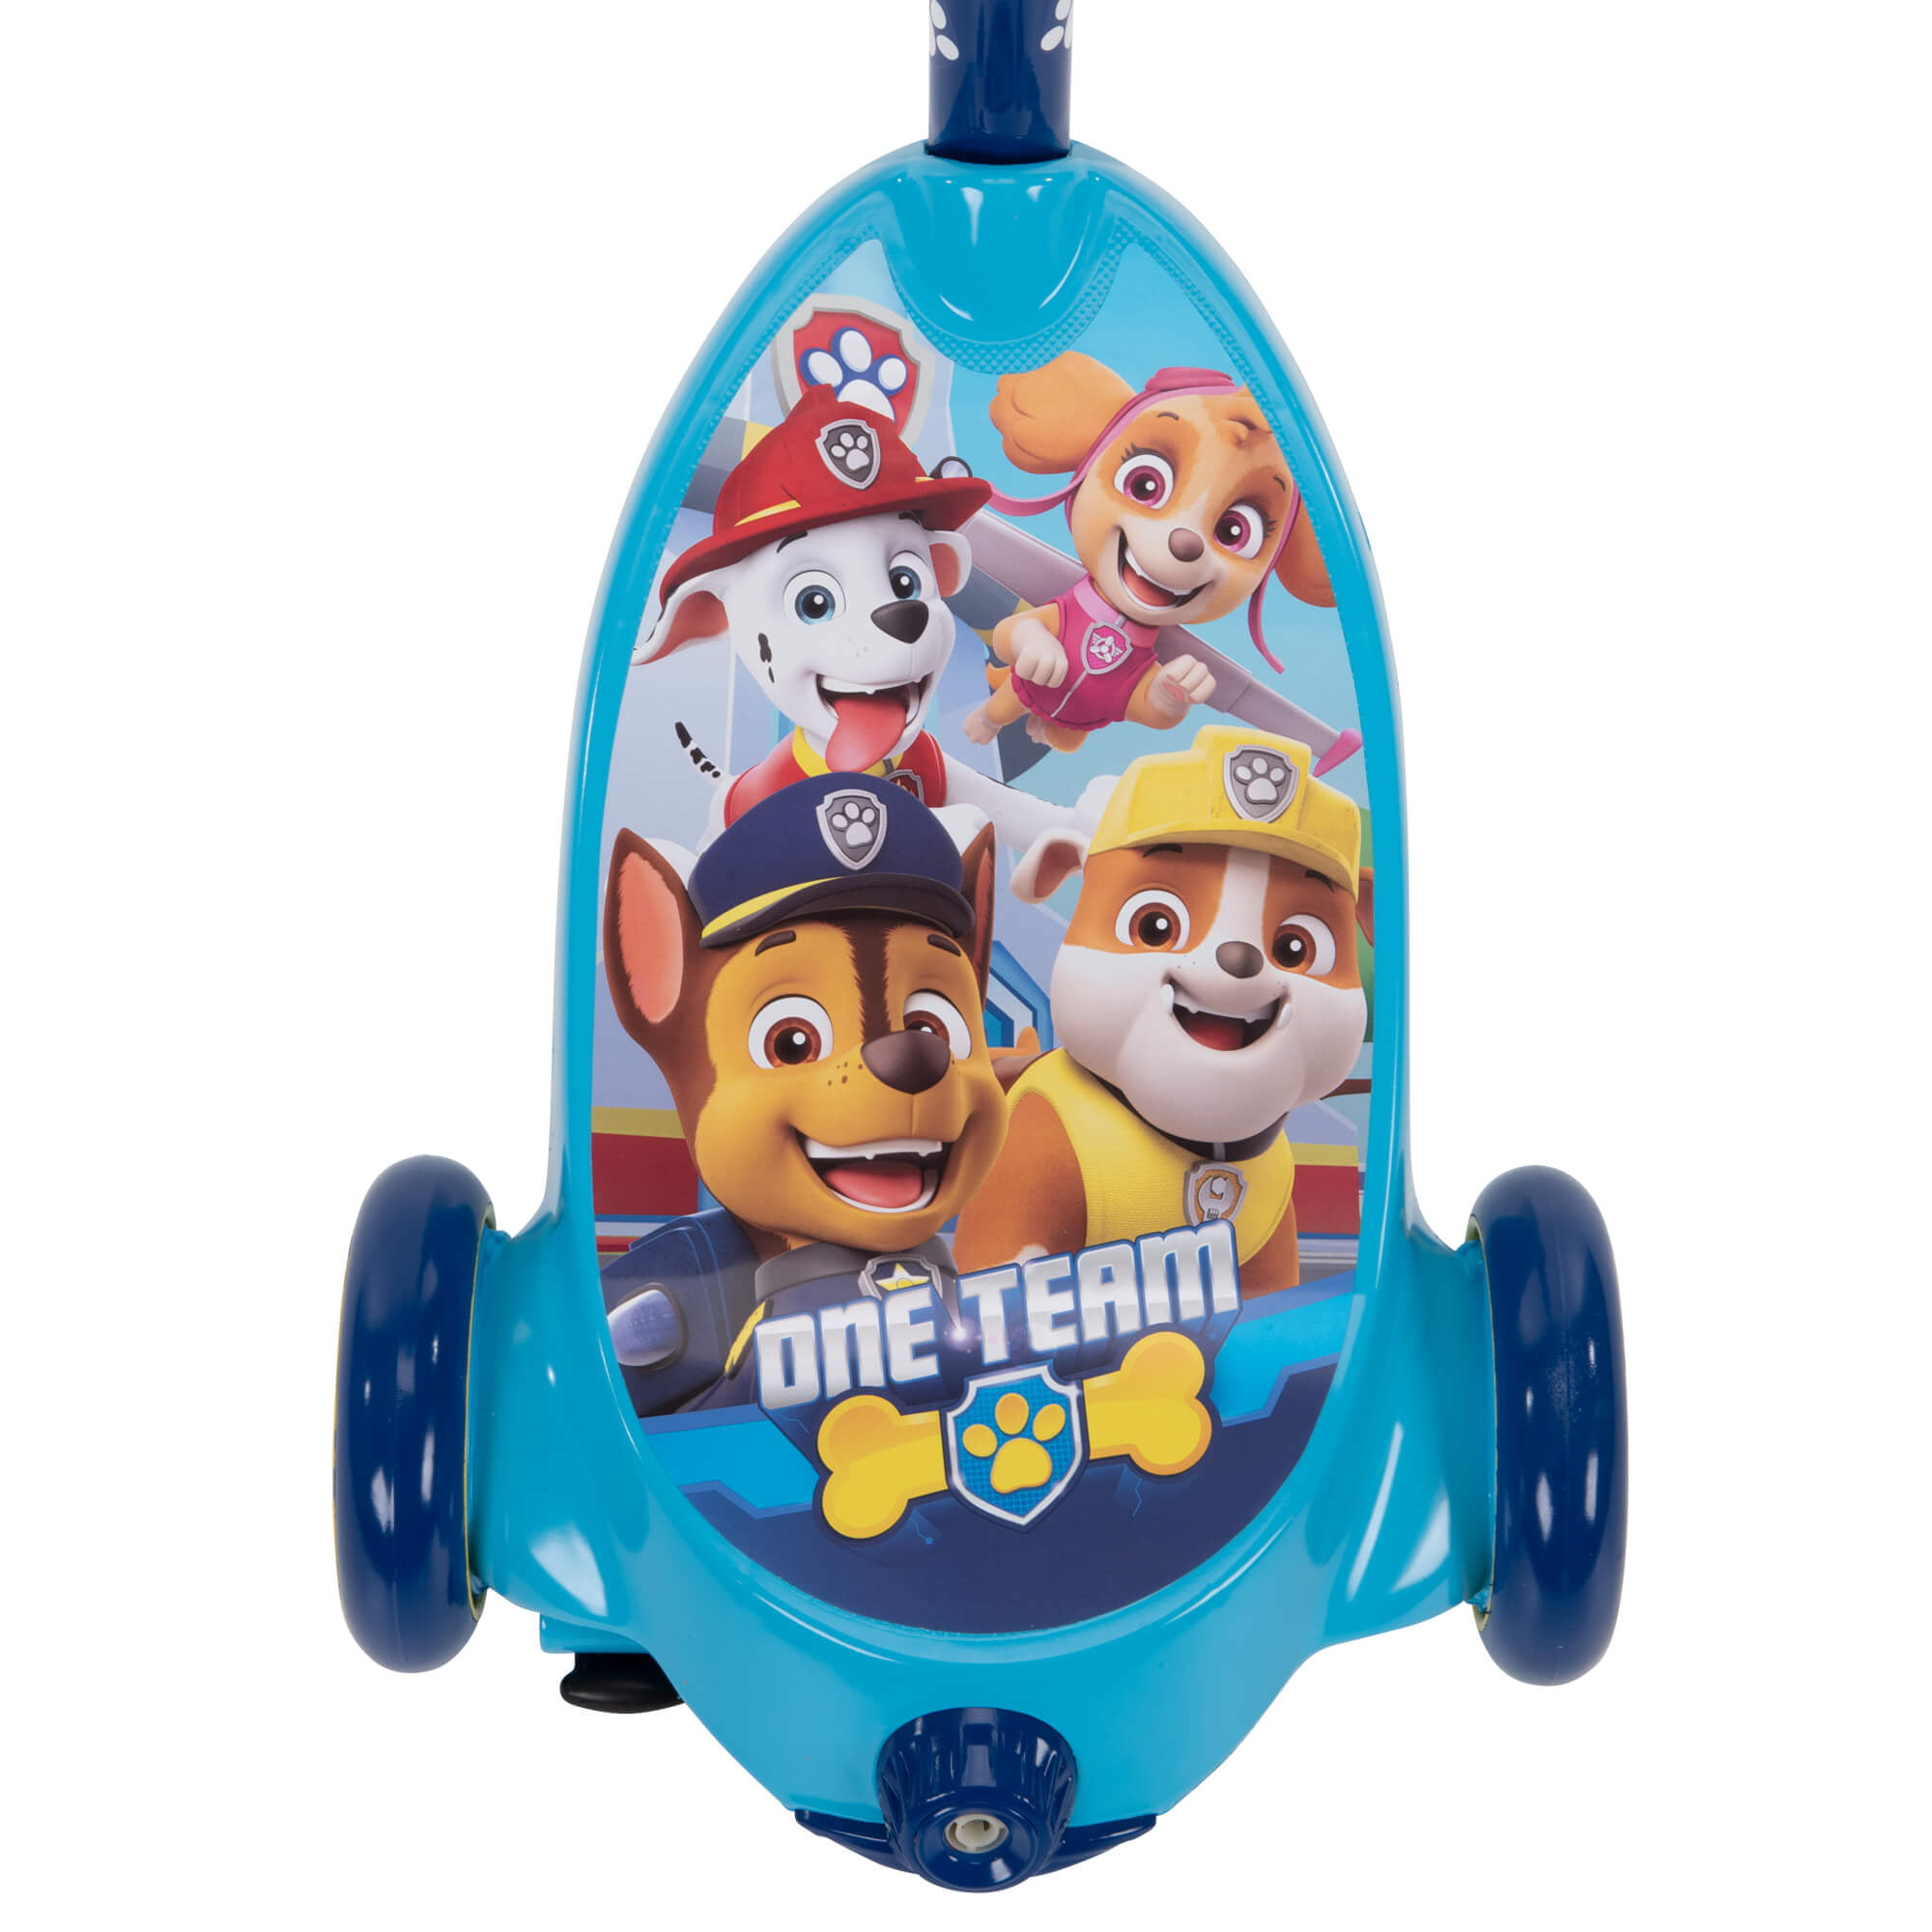 kids bubble scooter